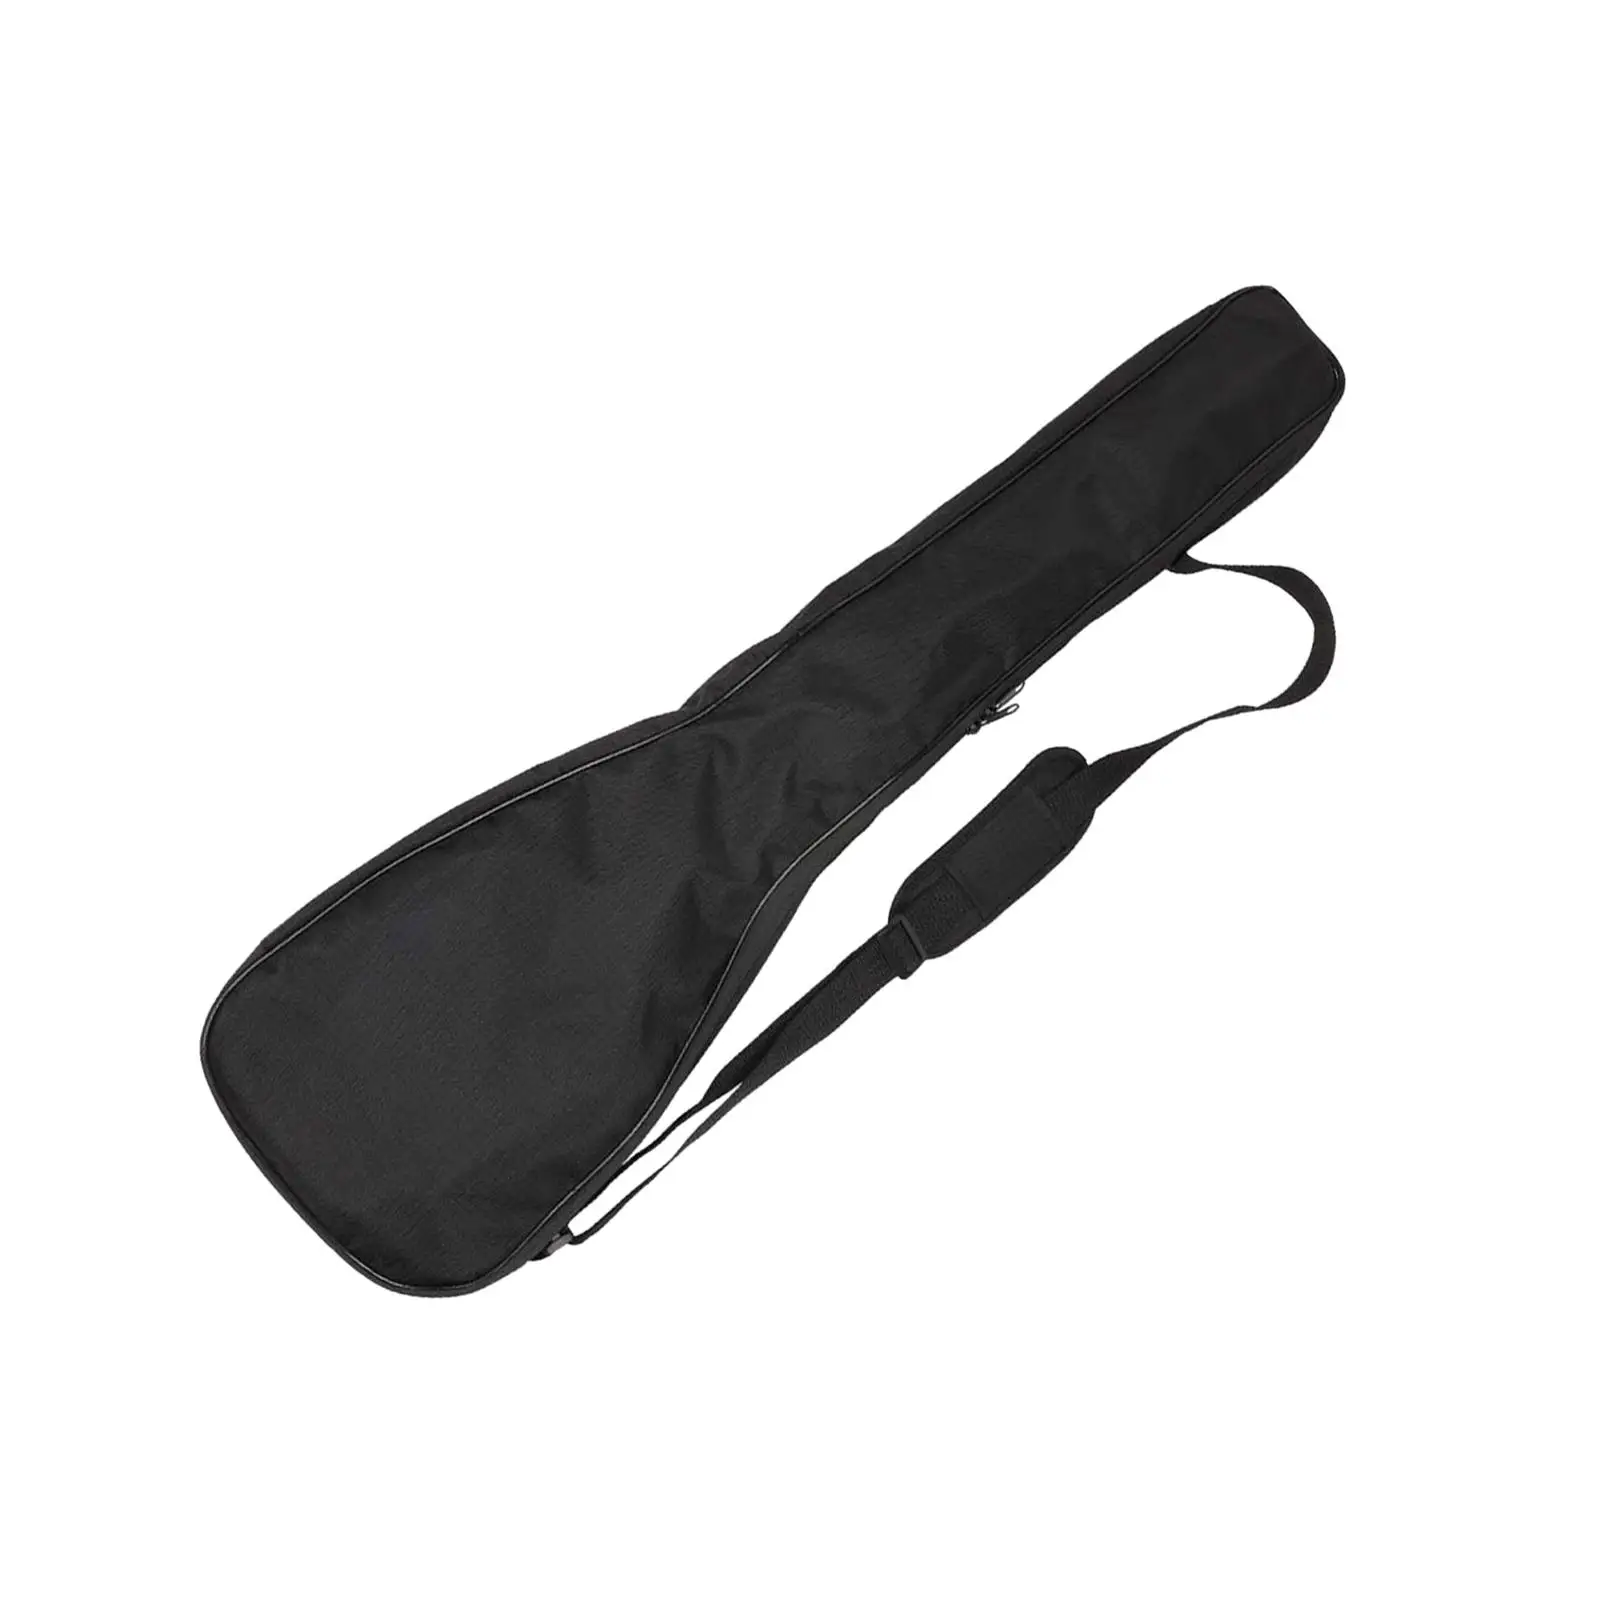 Canoe Kayak Paddle Bag for 3 Piece Split Paddle Wear Resistant Thick Durable